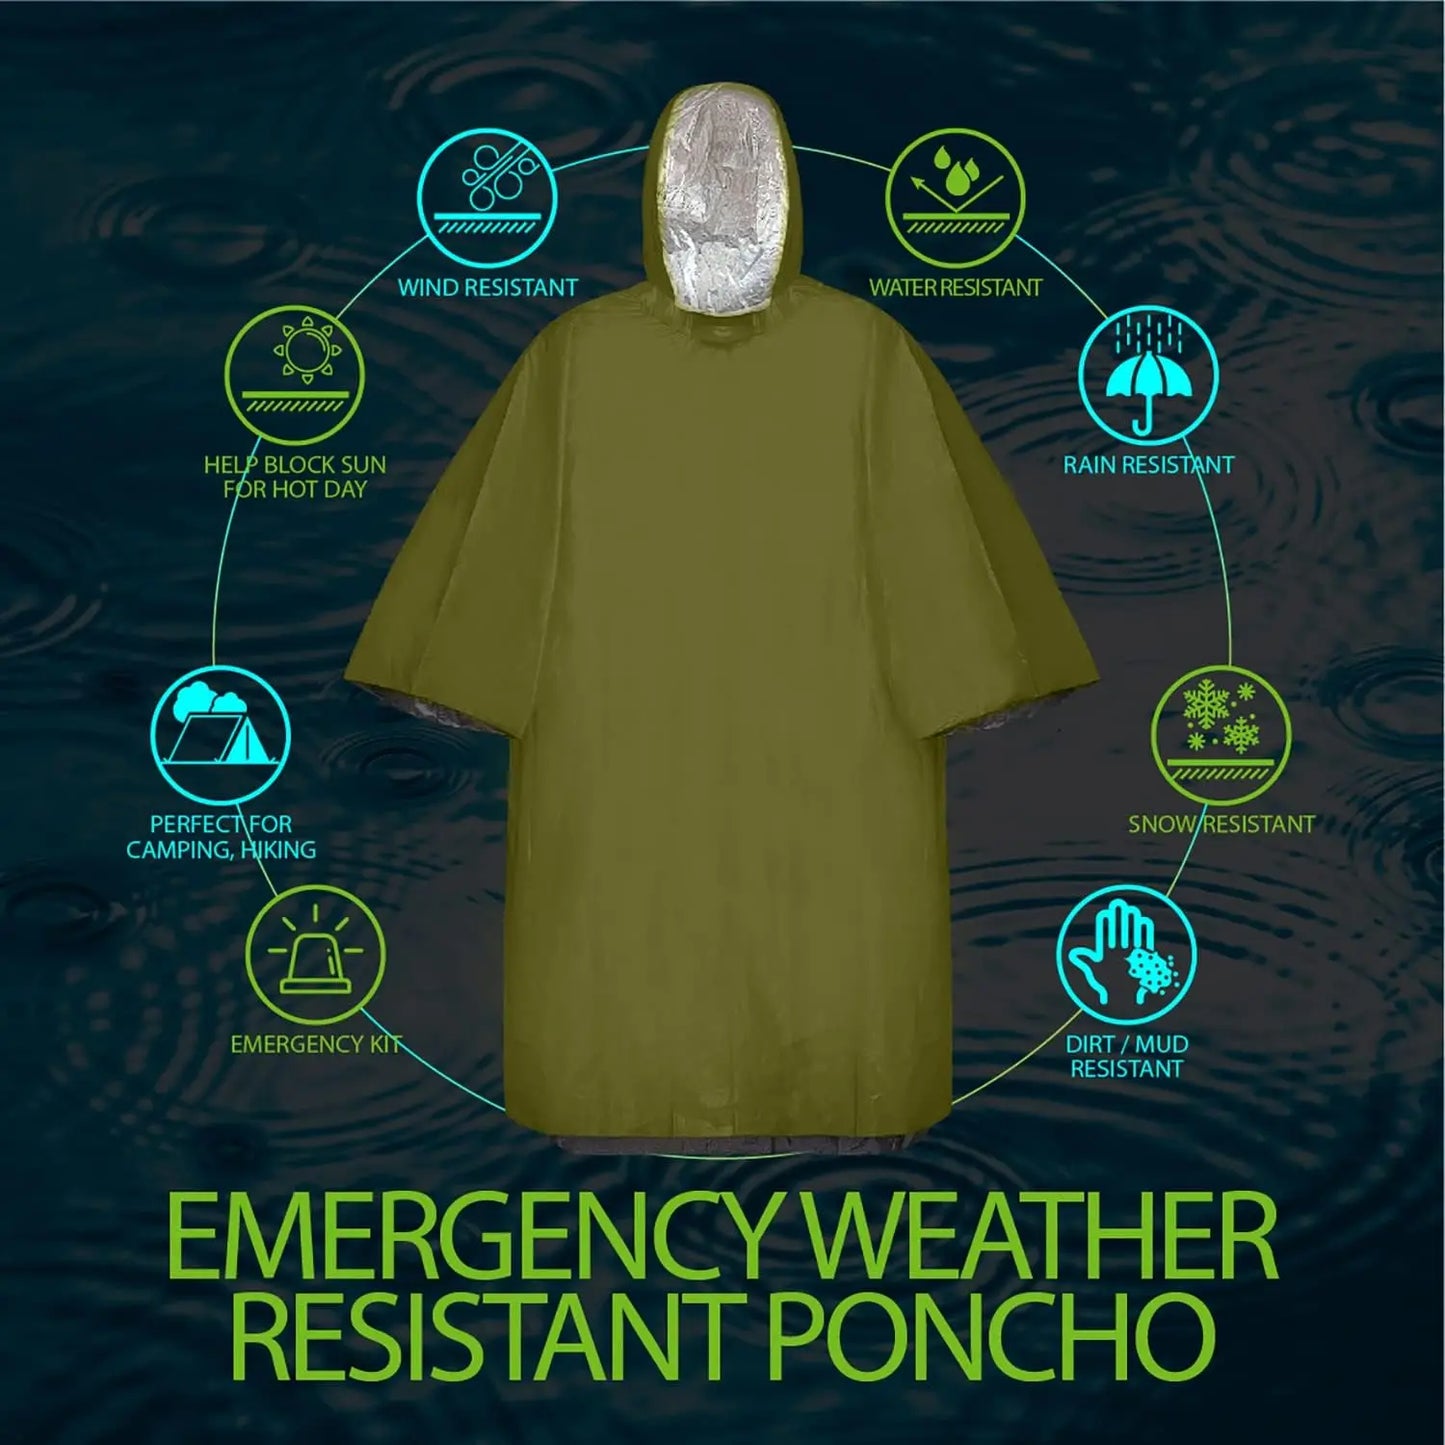 Emergency Rain Poncho With Hood Reusable Weather Resistant Raincoat For Men Women Camping Hiking Emergency Supplies Survival Kit